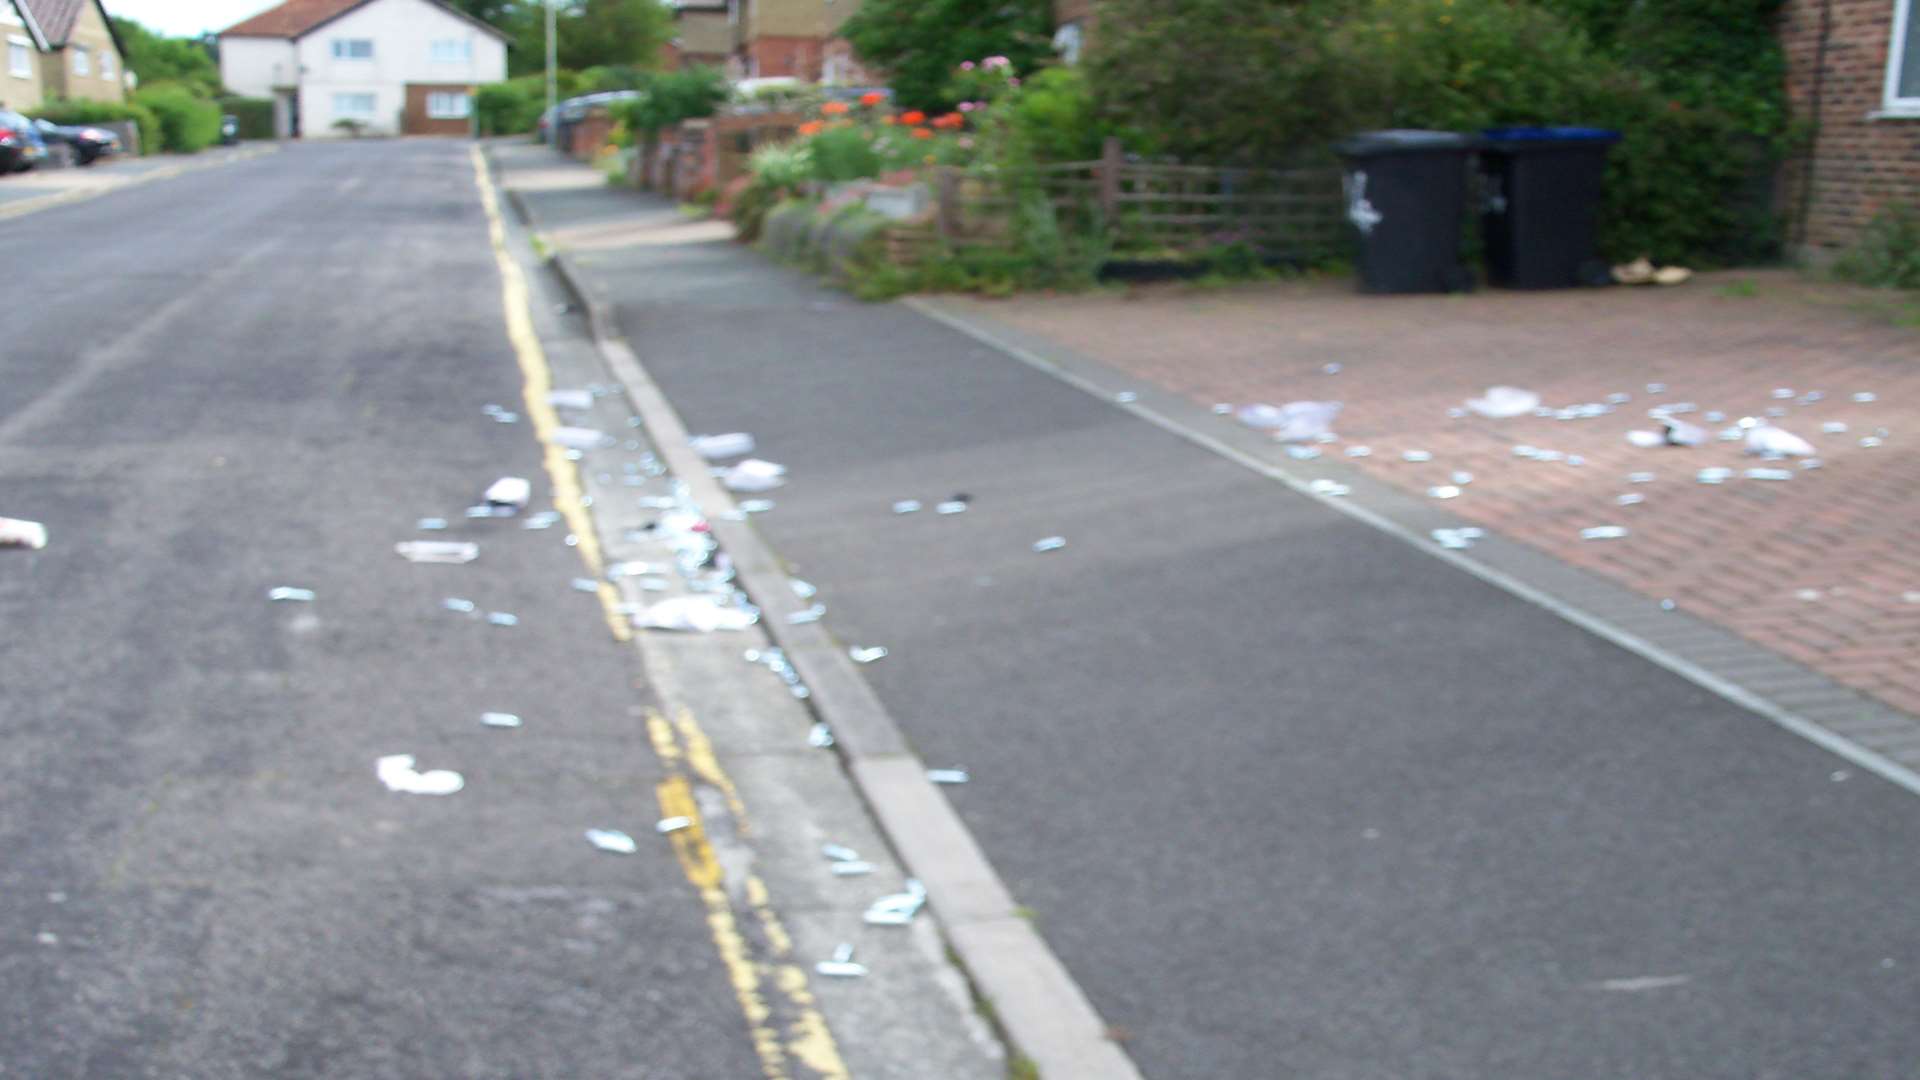 The canisters have been strewn across the road